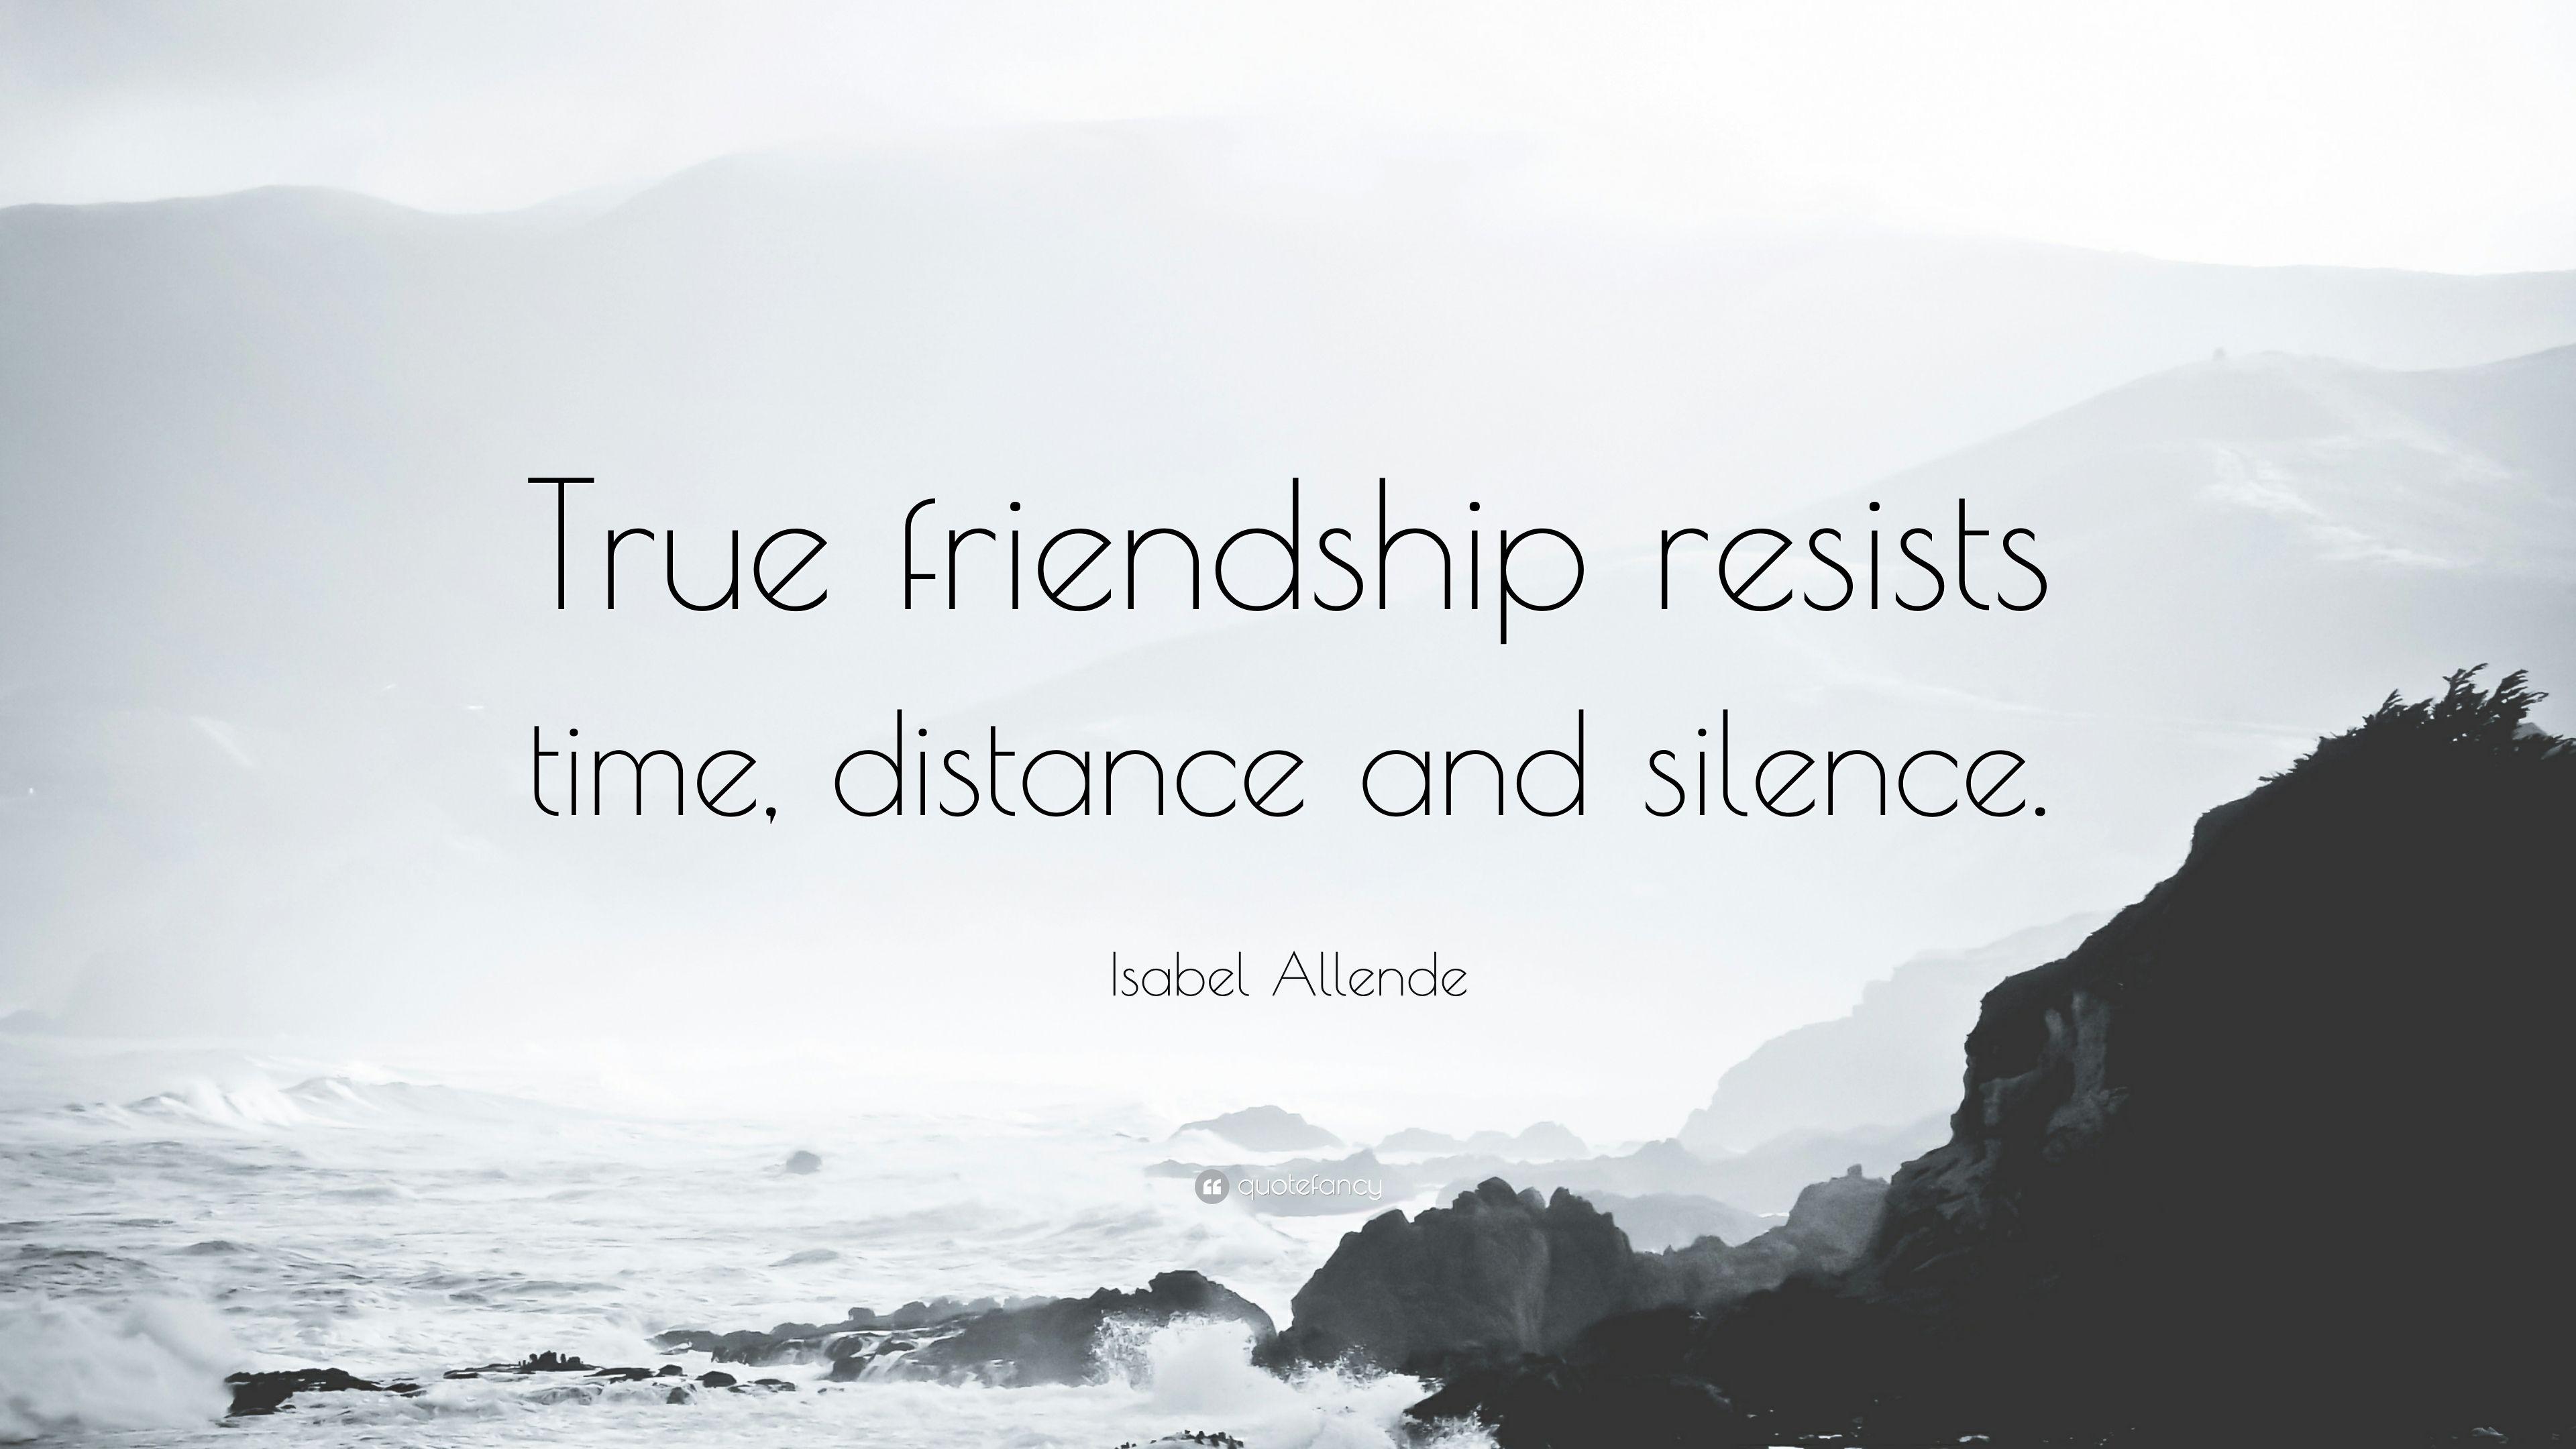 Isabel Allende Quote: “True friendship resists time, distance